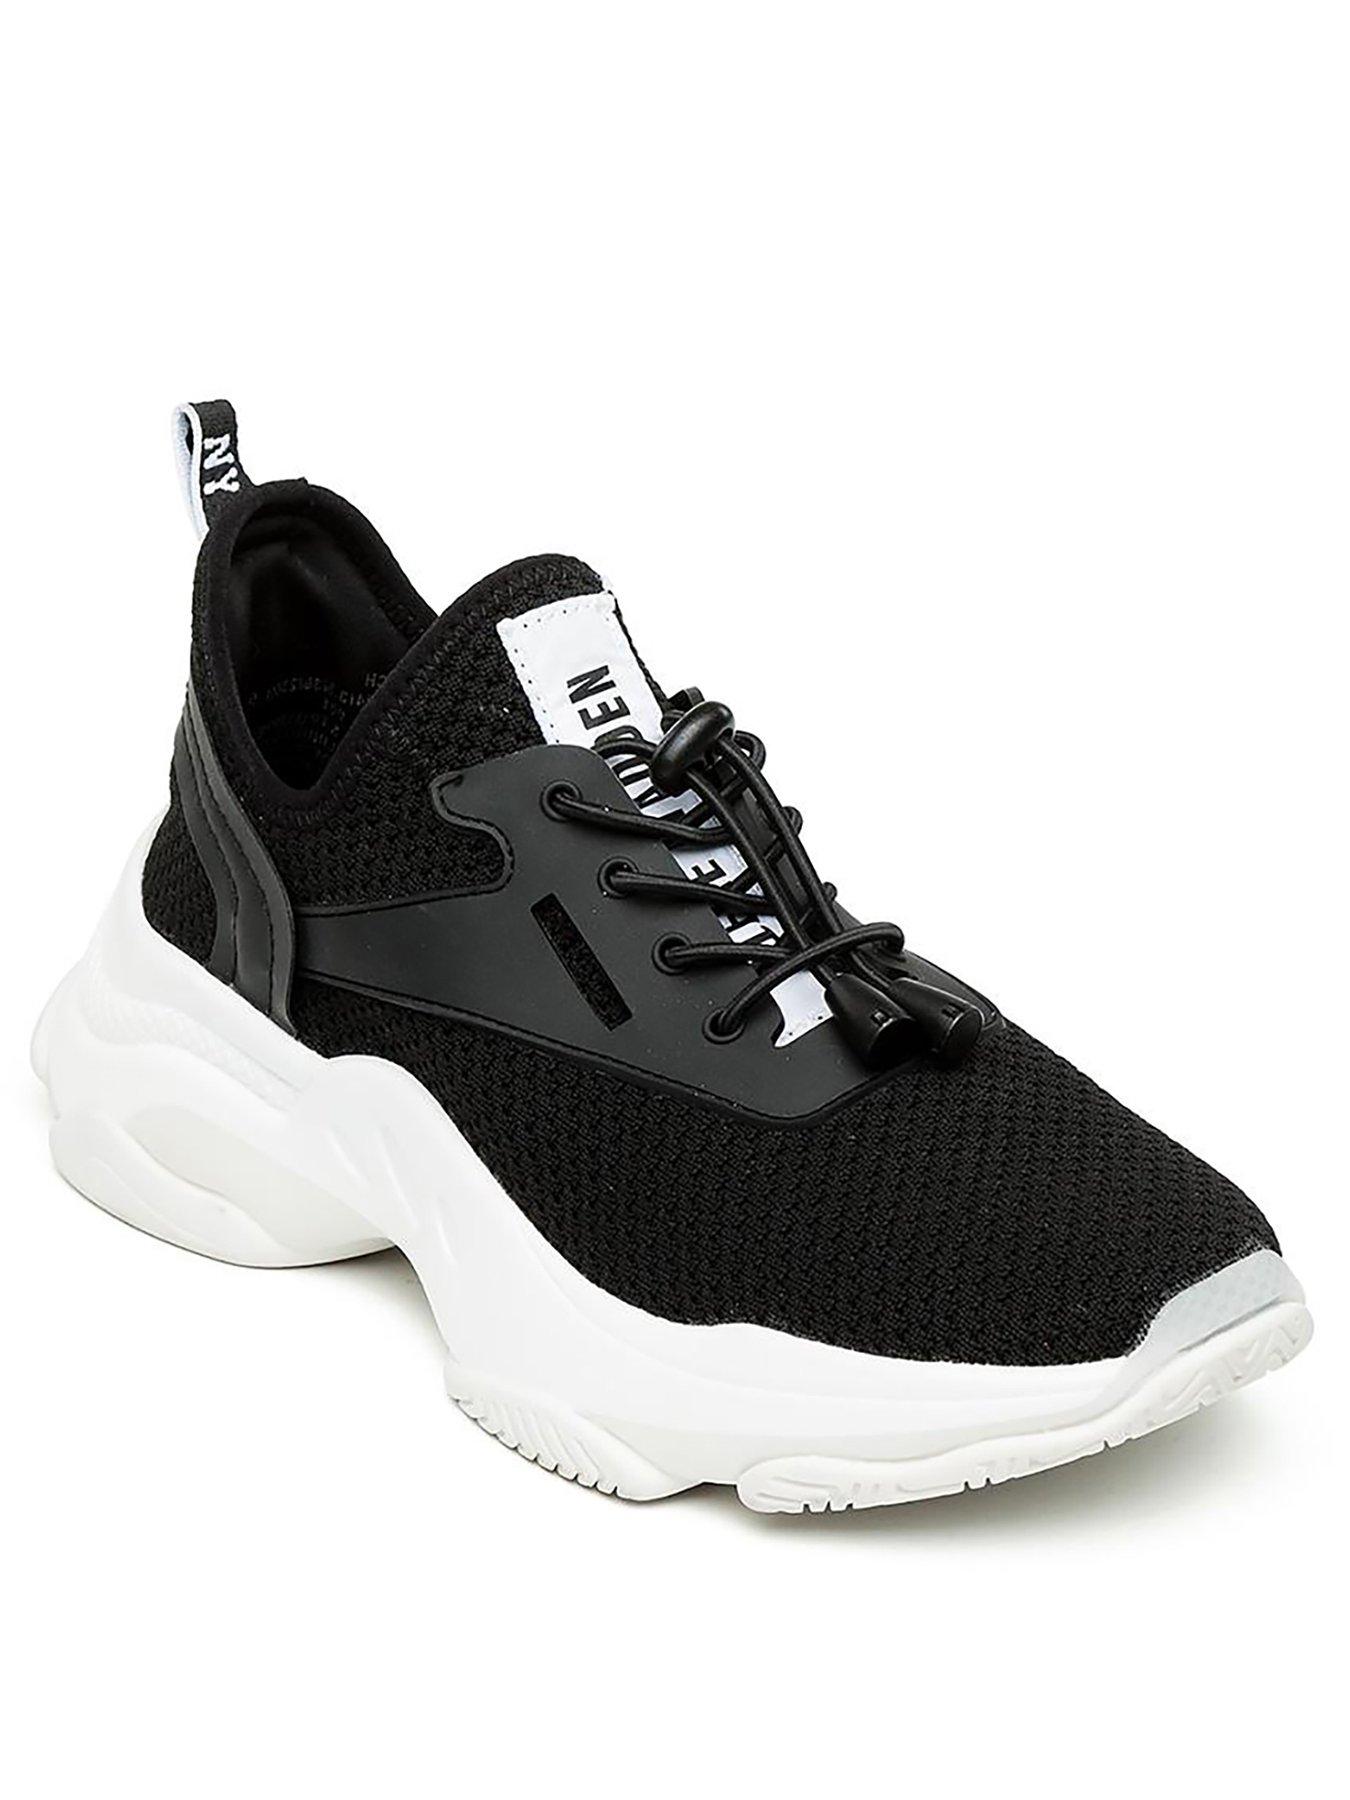 steve madden trainers sale